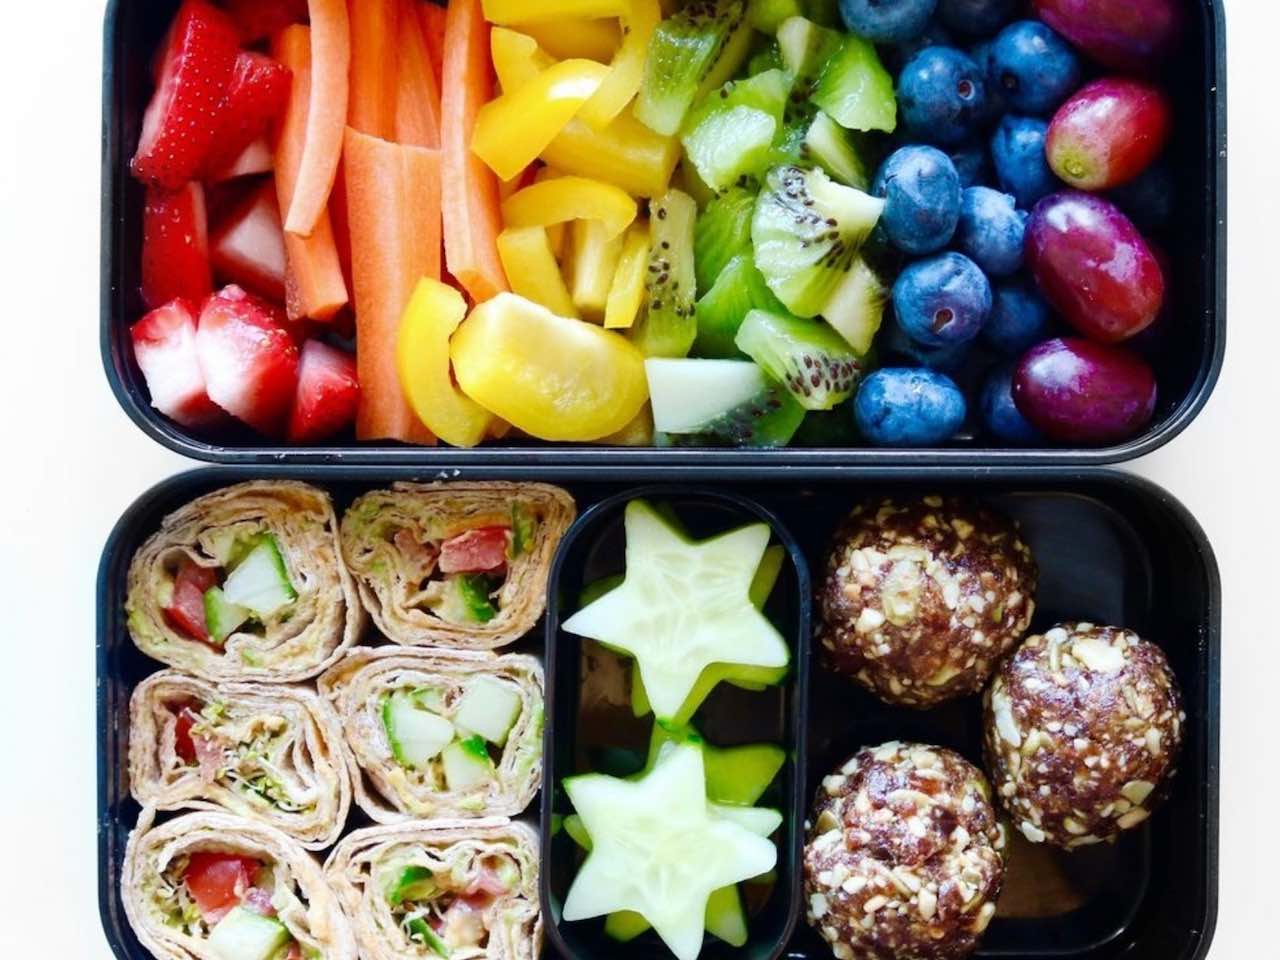 What Foods Can You Pack In A Bento Box? - Eats Amazing.